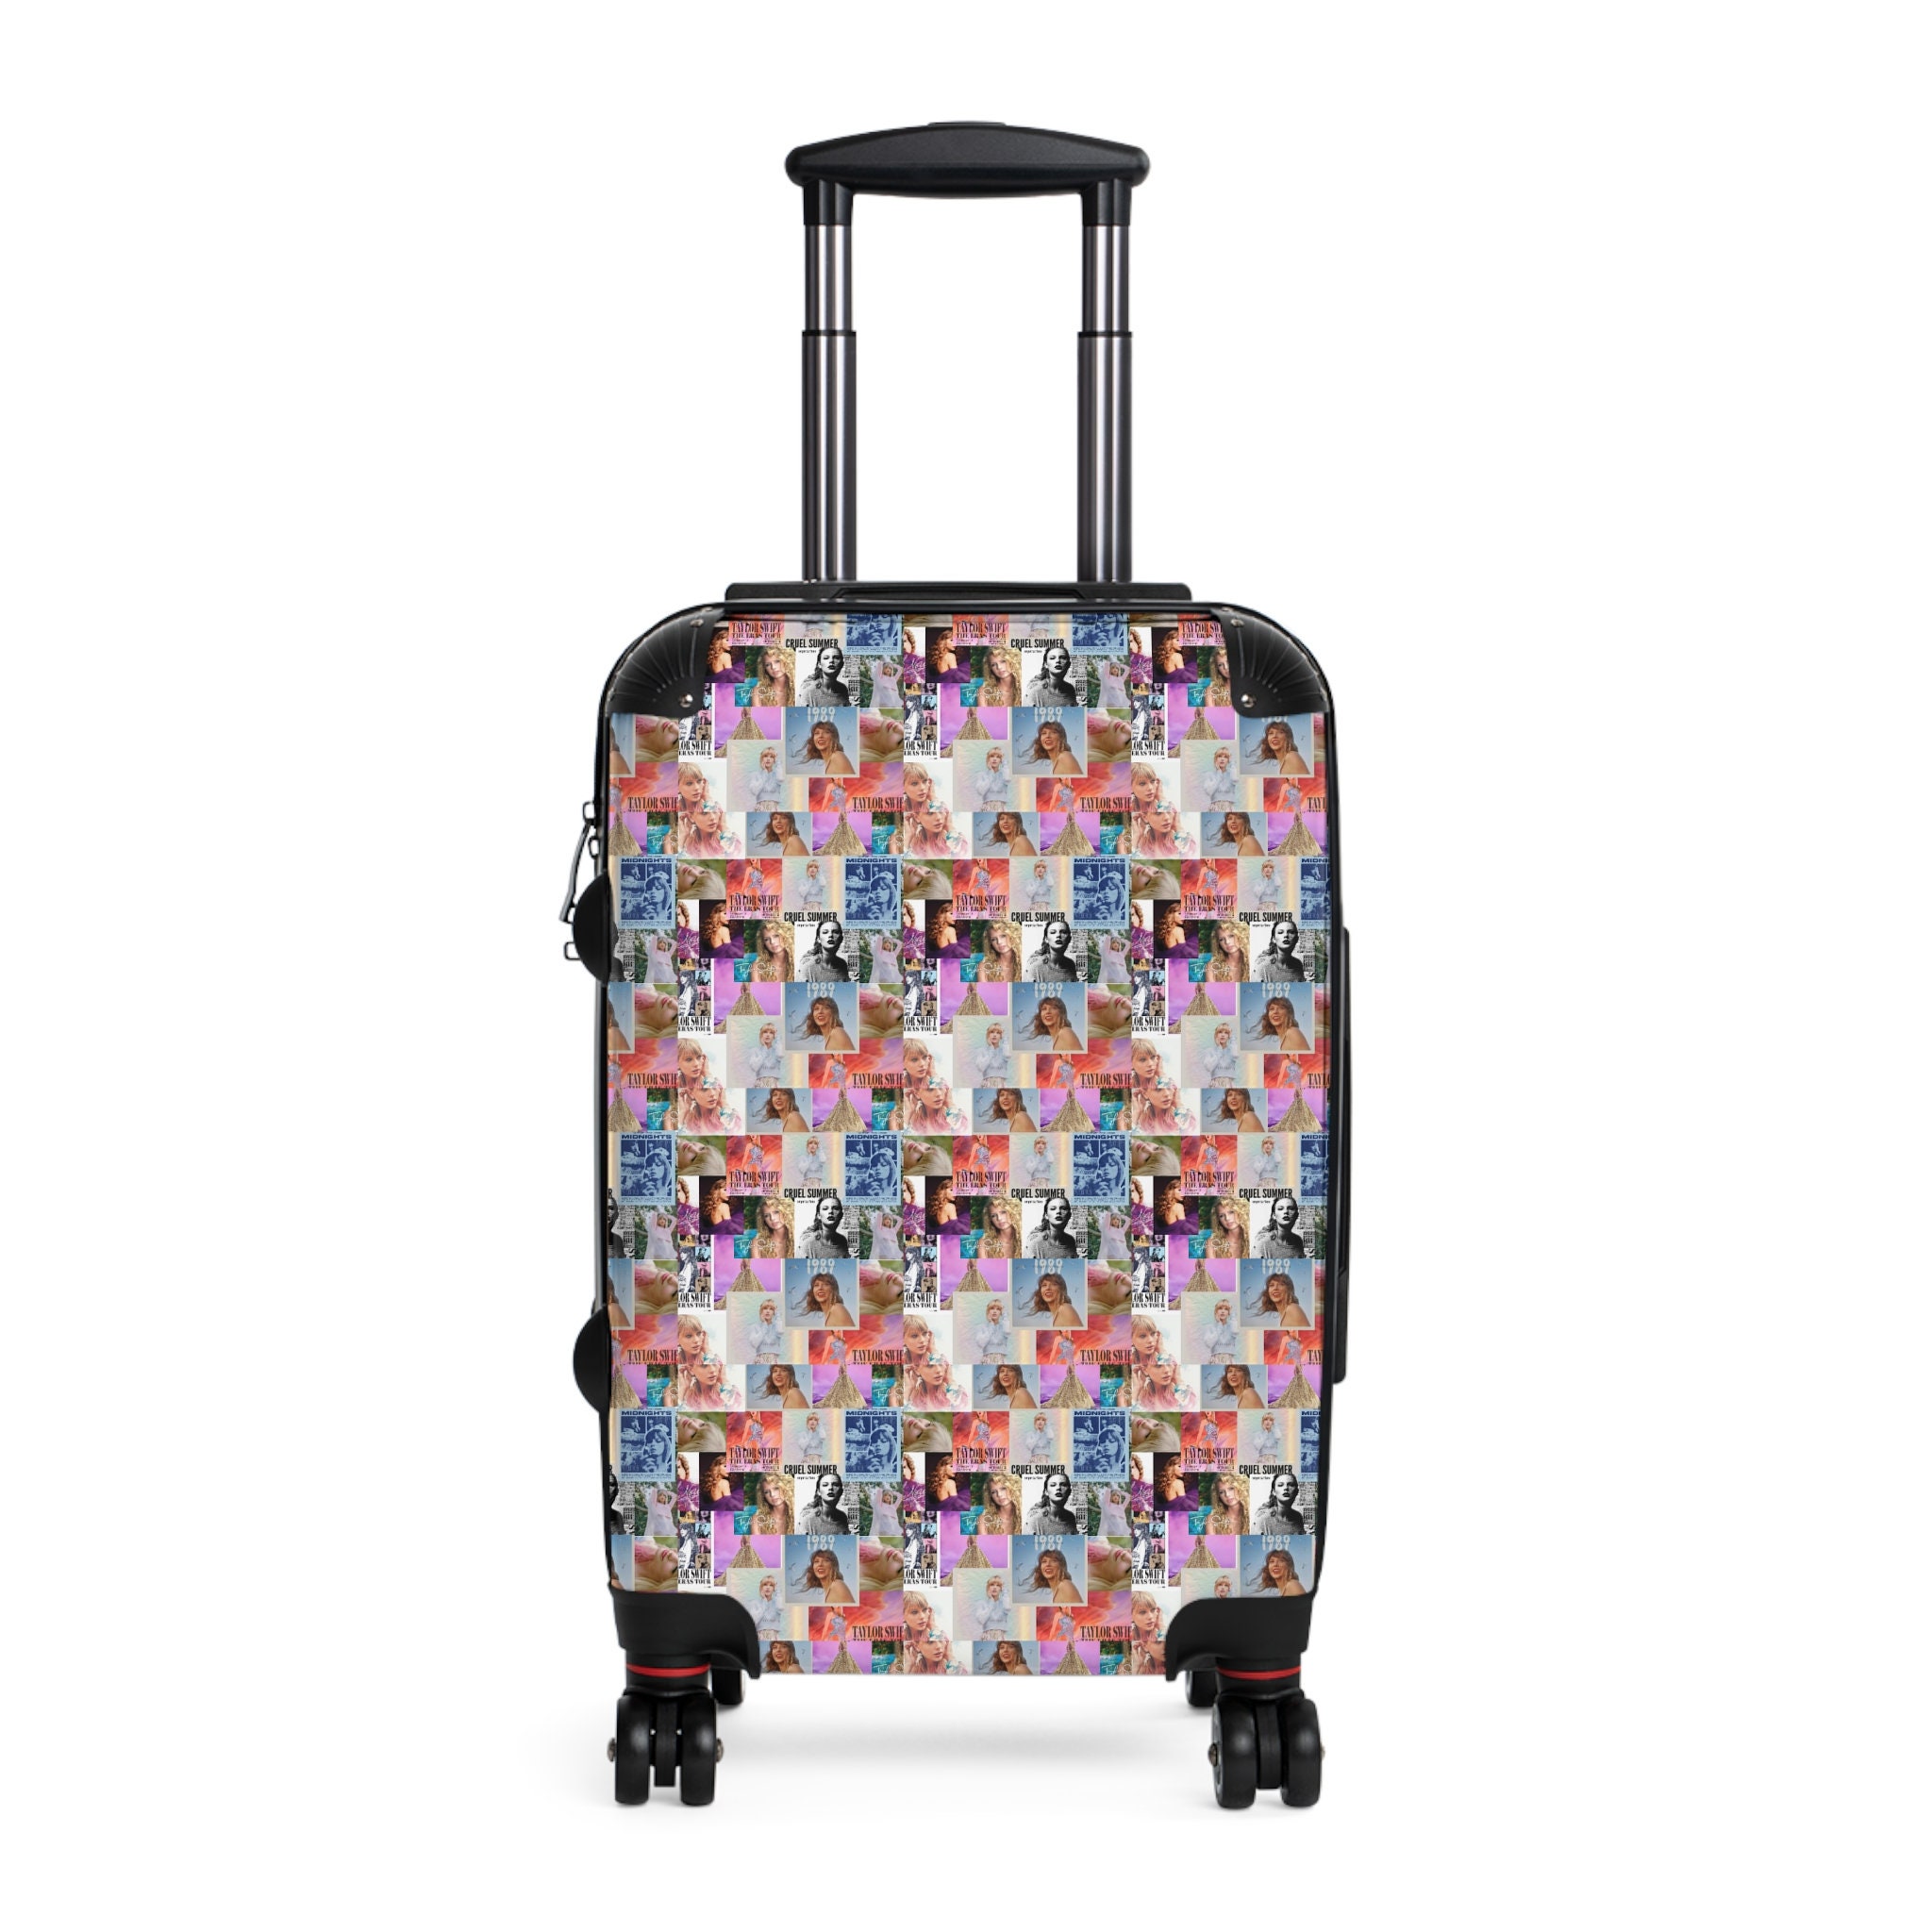 Taylor Graphic Suitcase - Taylor merch